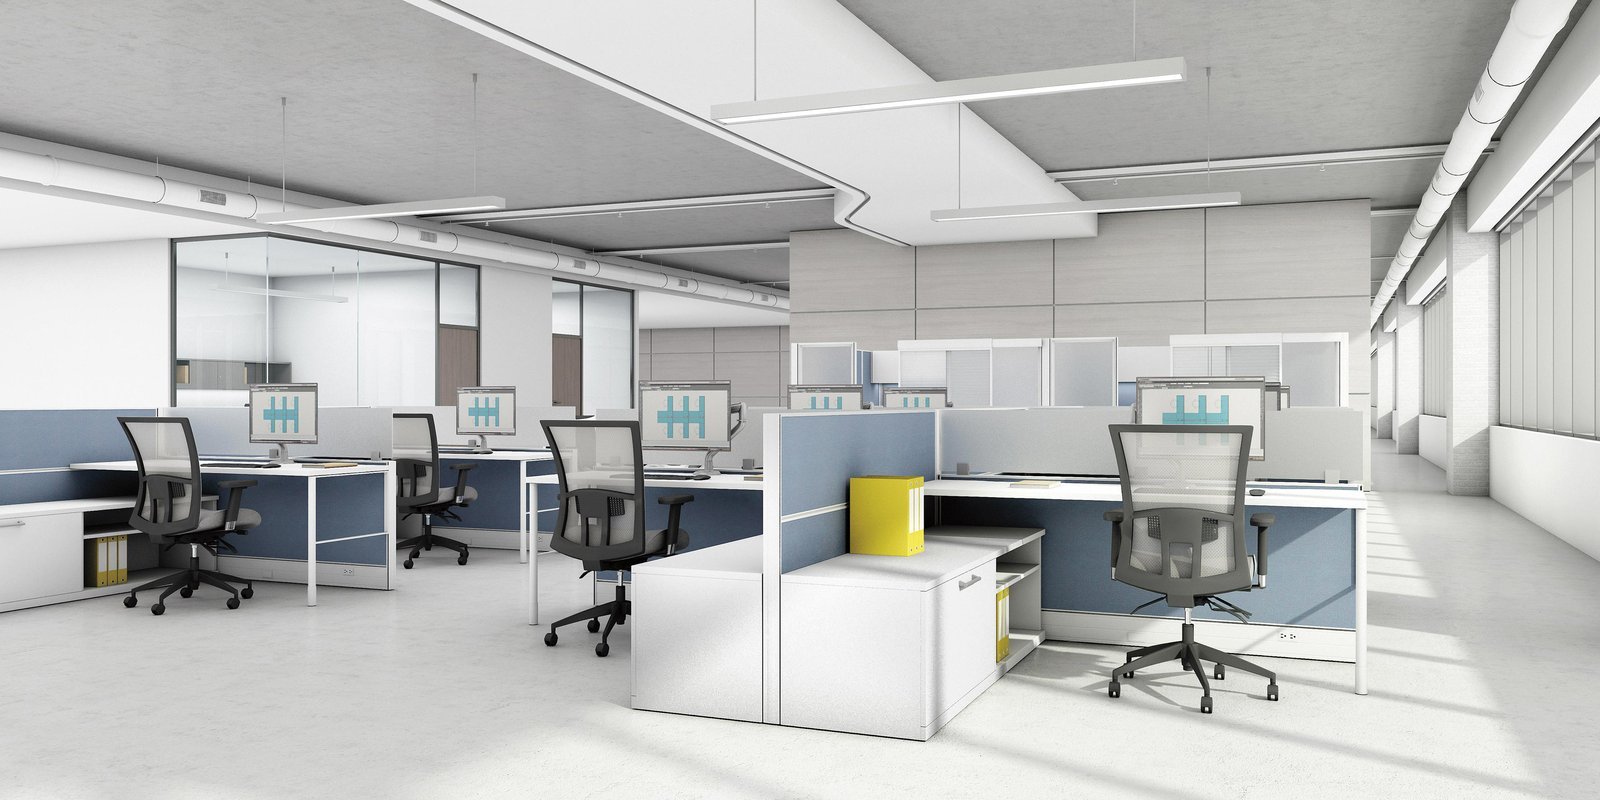 Best Cubicle And Workstation Designs In 2020